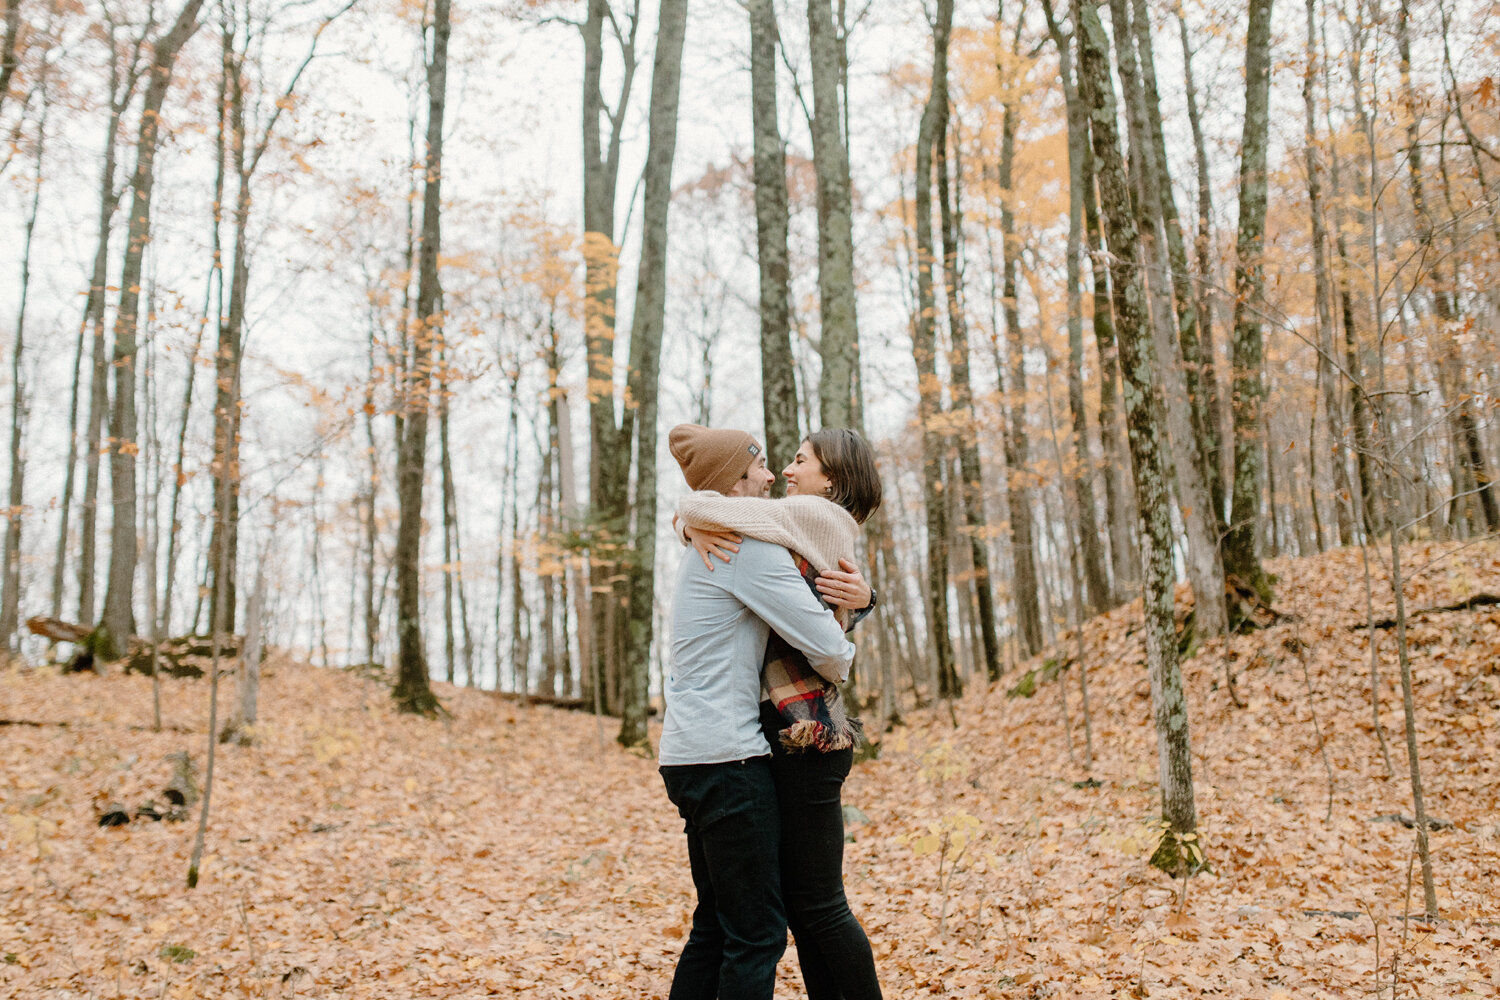  Wrapped in one another’s arms, Chelsea Mason Photography captures this in-love couple during their engagement shoot in Quebec, Canada. Couple wrapped in one another’s arms, man picking up wife, nice casual autumn engagement outfit, womens cream over